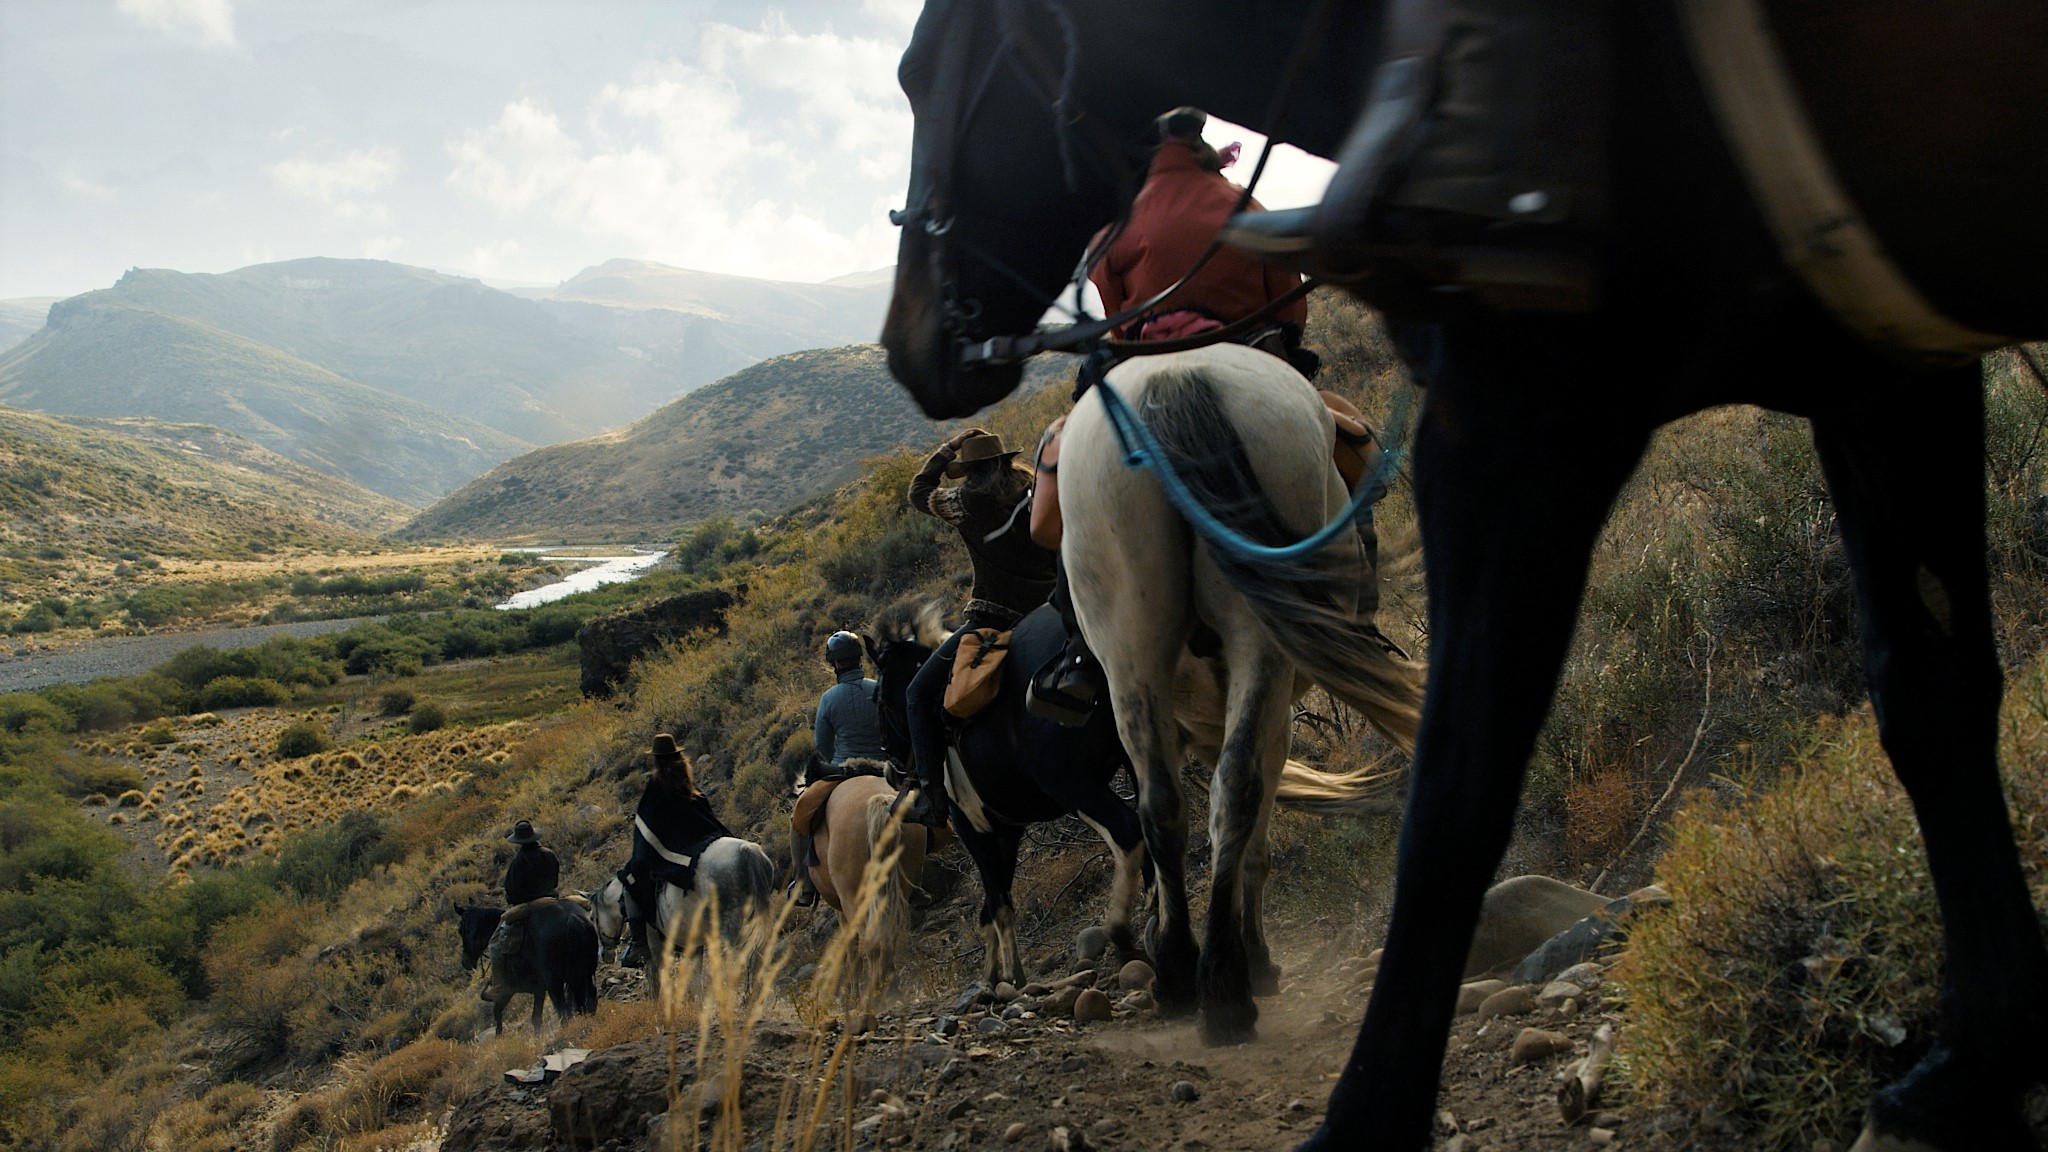 String of riders descending into a river valley in the backcountry of Estancia Ranquilco